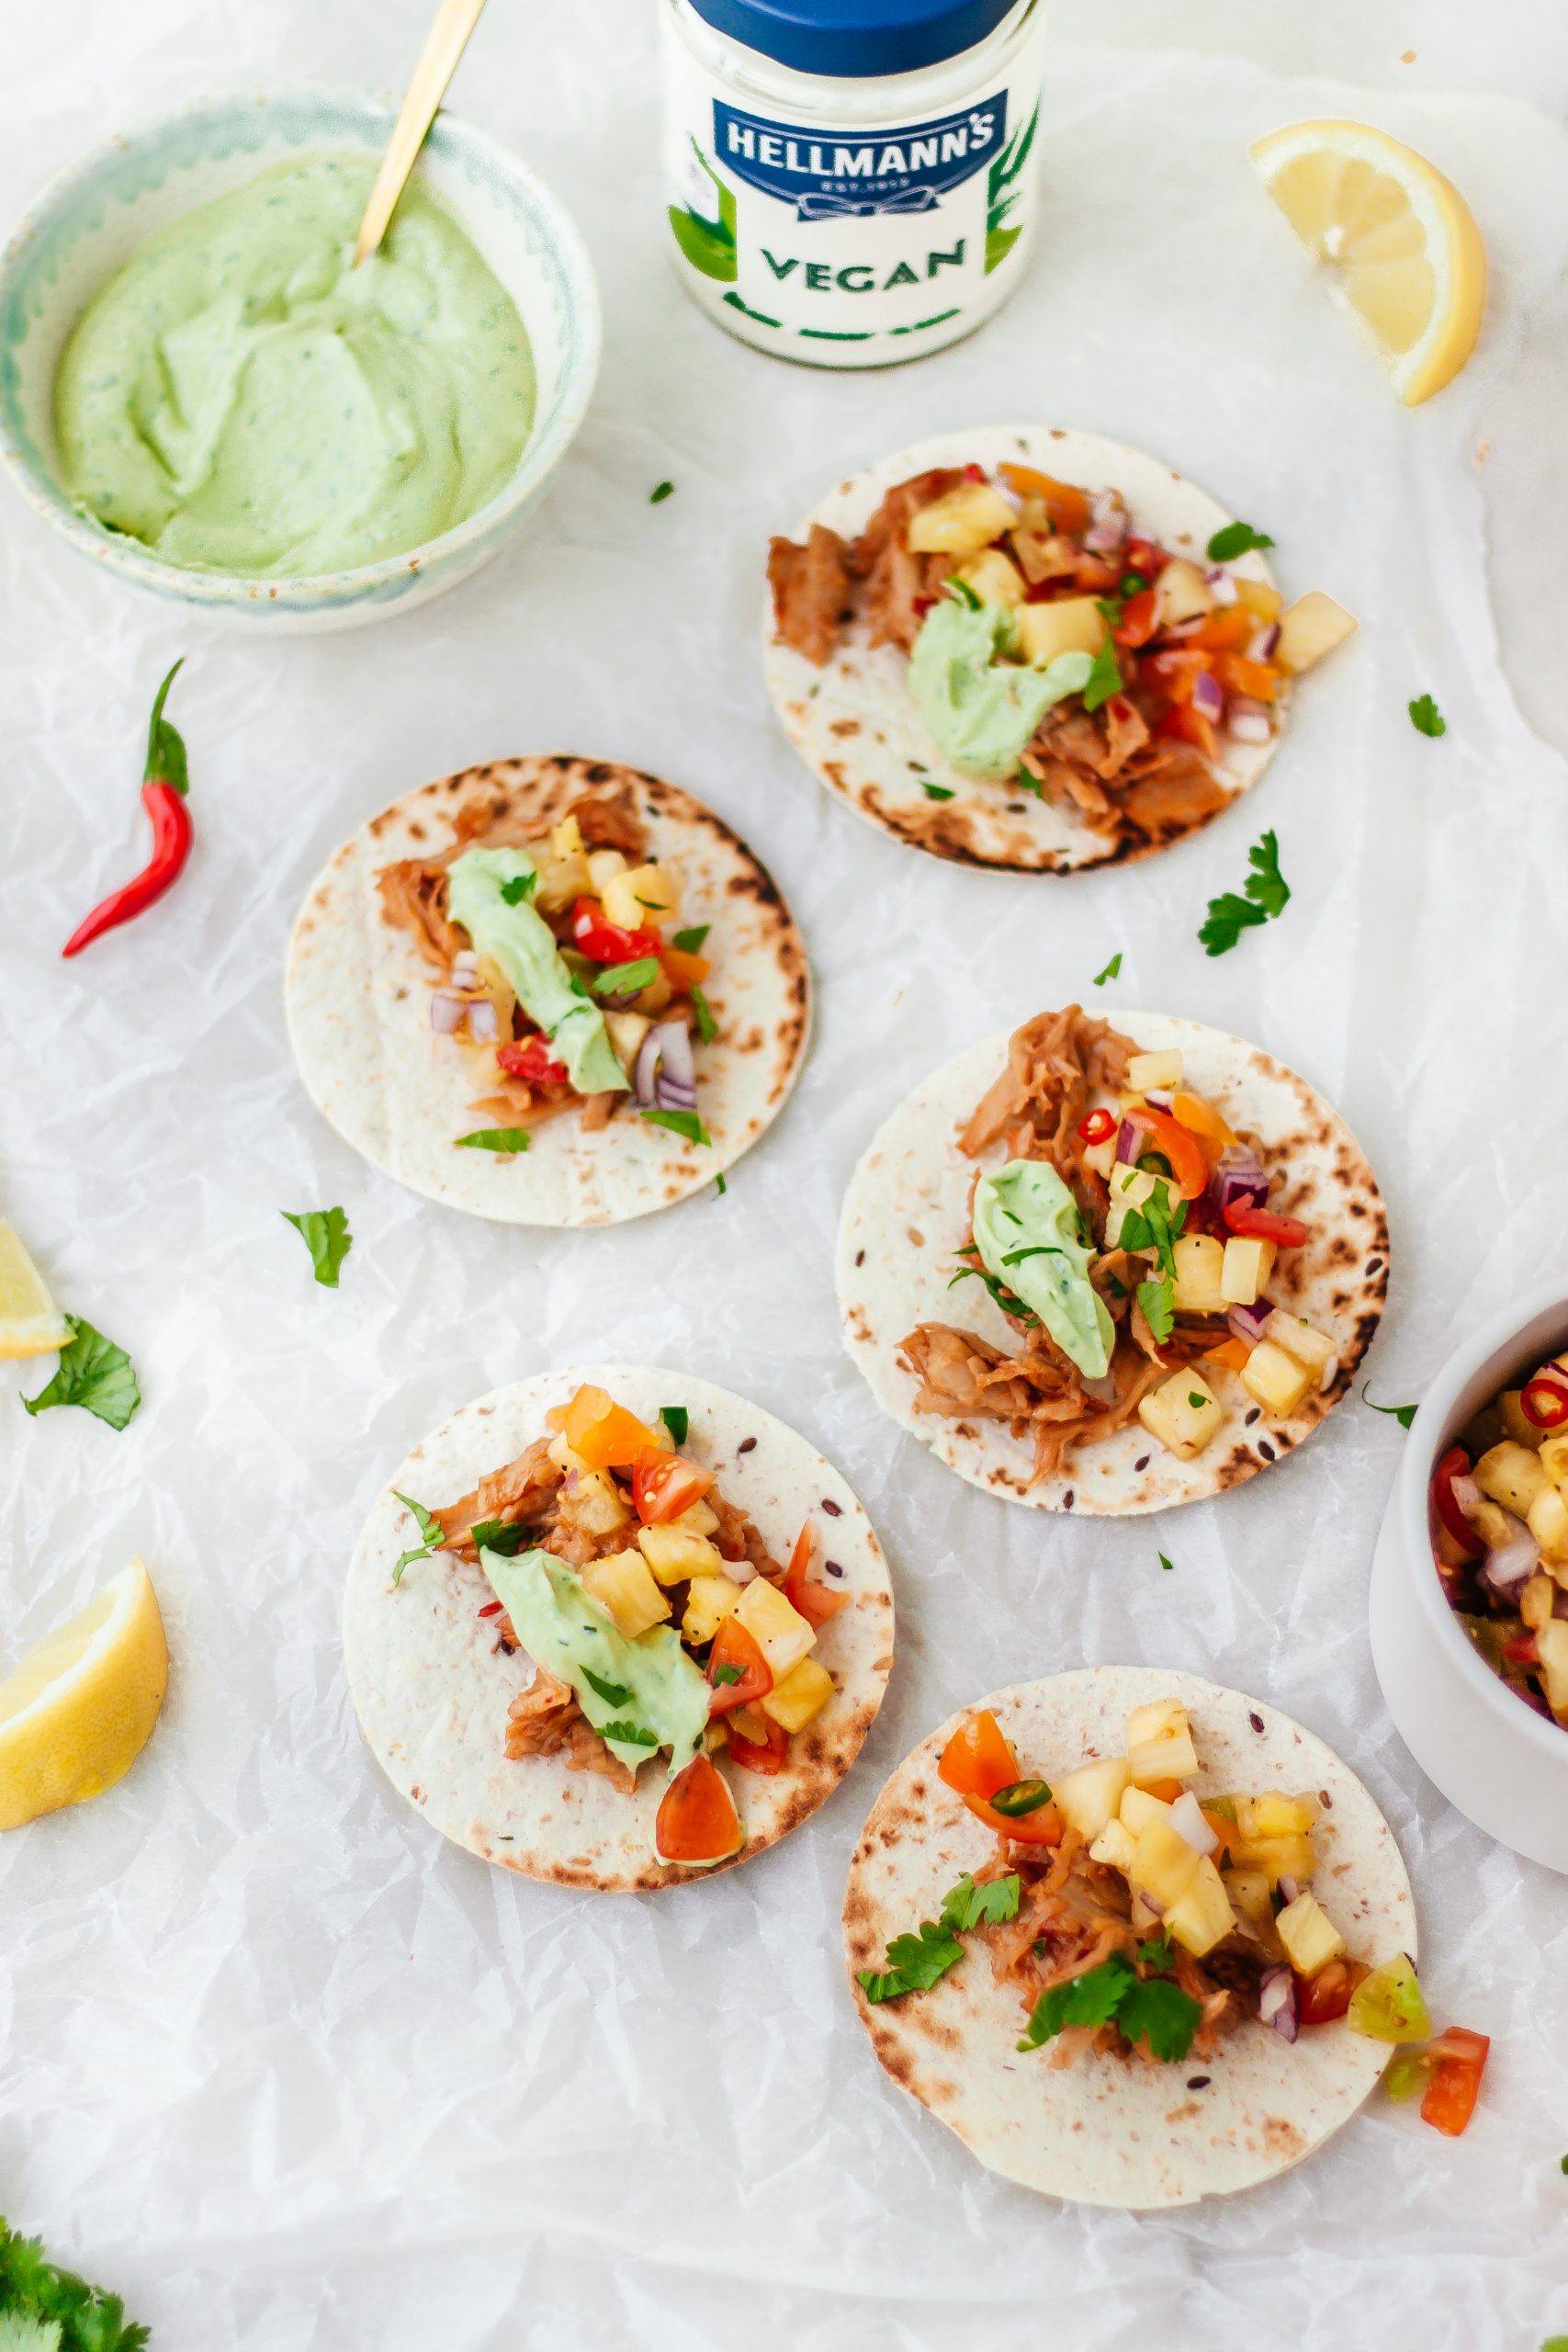 Bbq pulled “chicken” taco met ananas